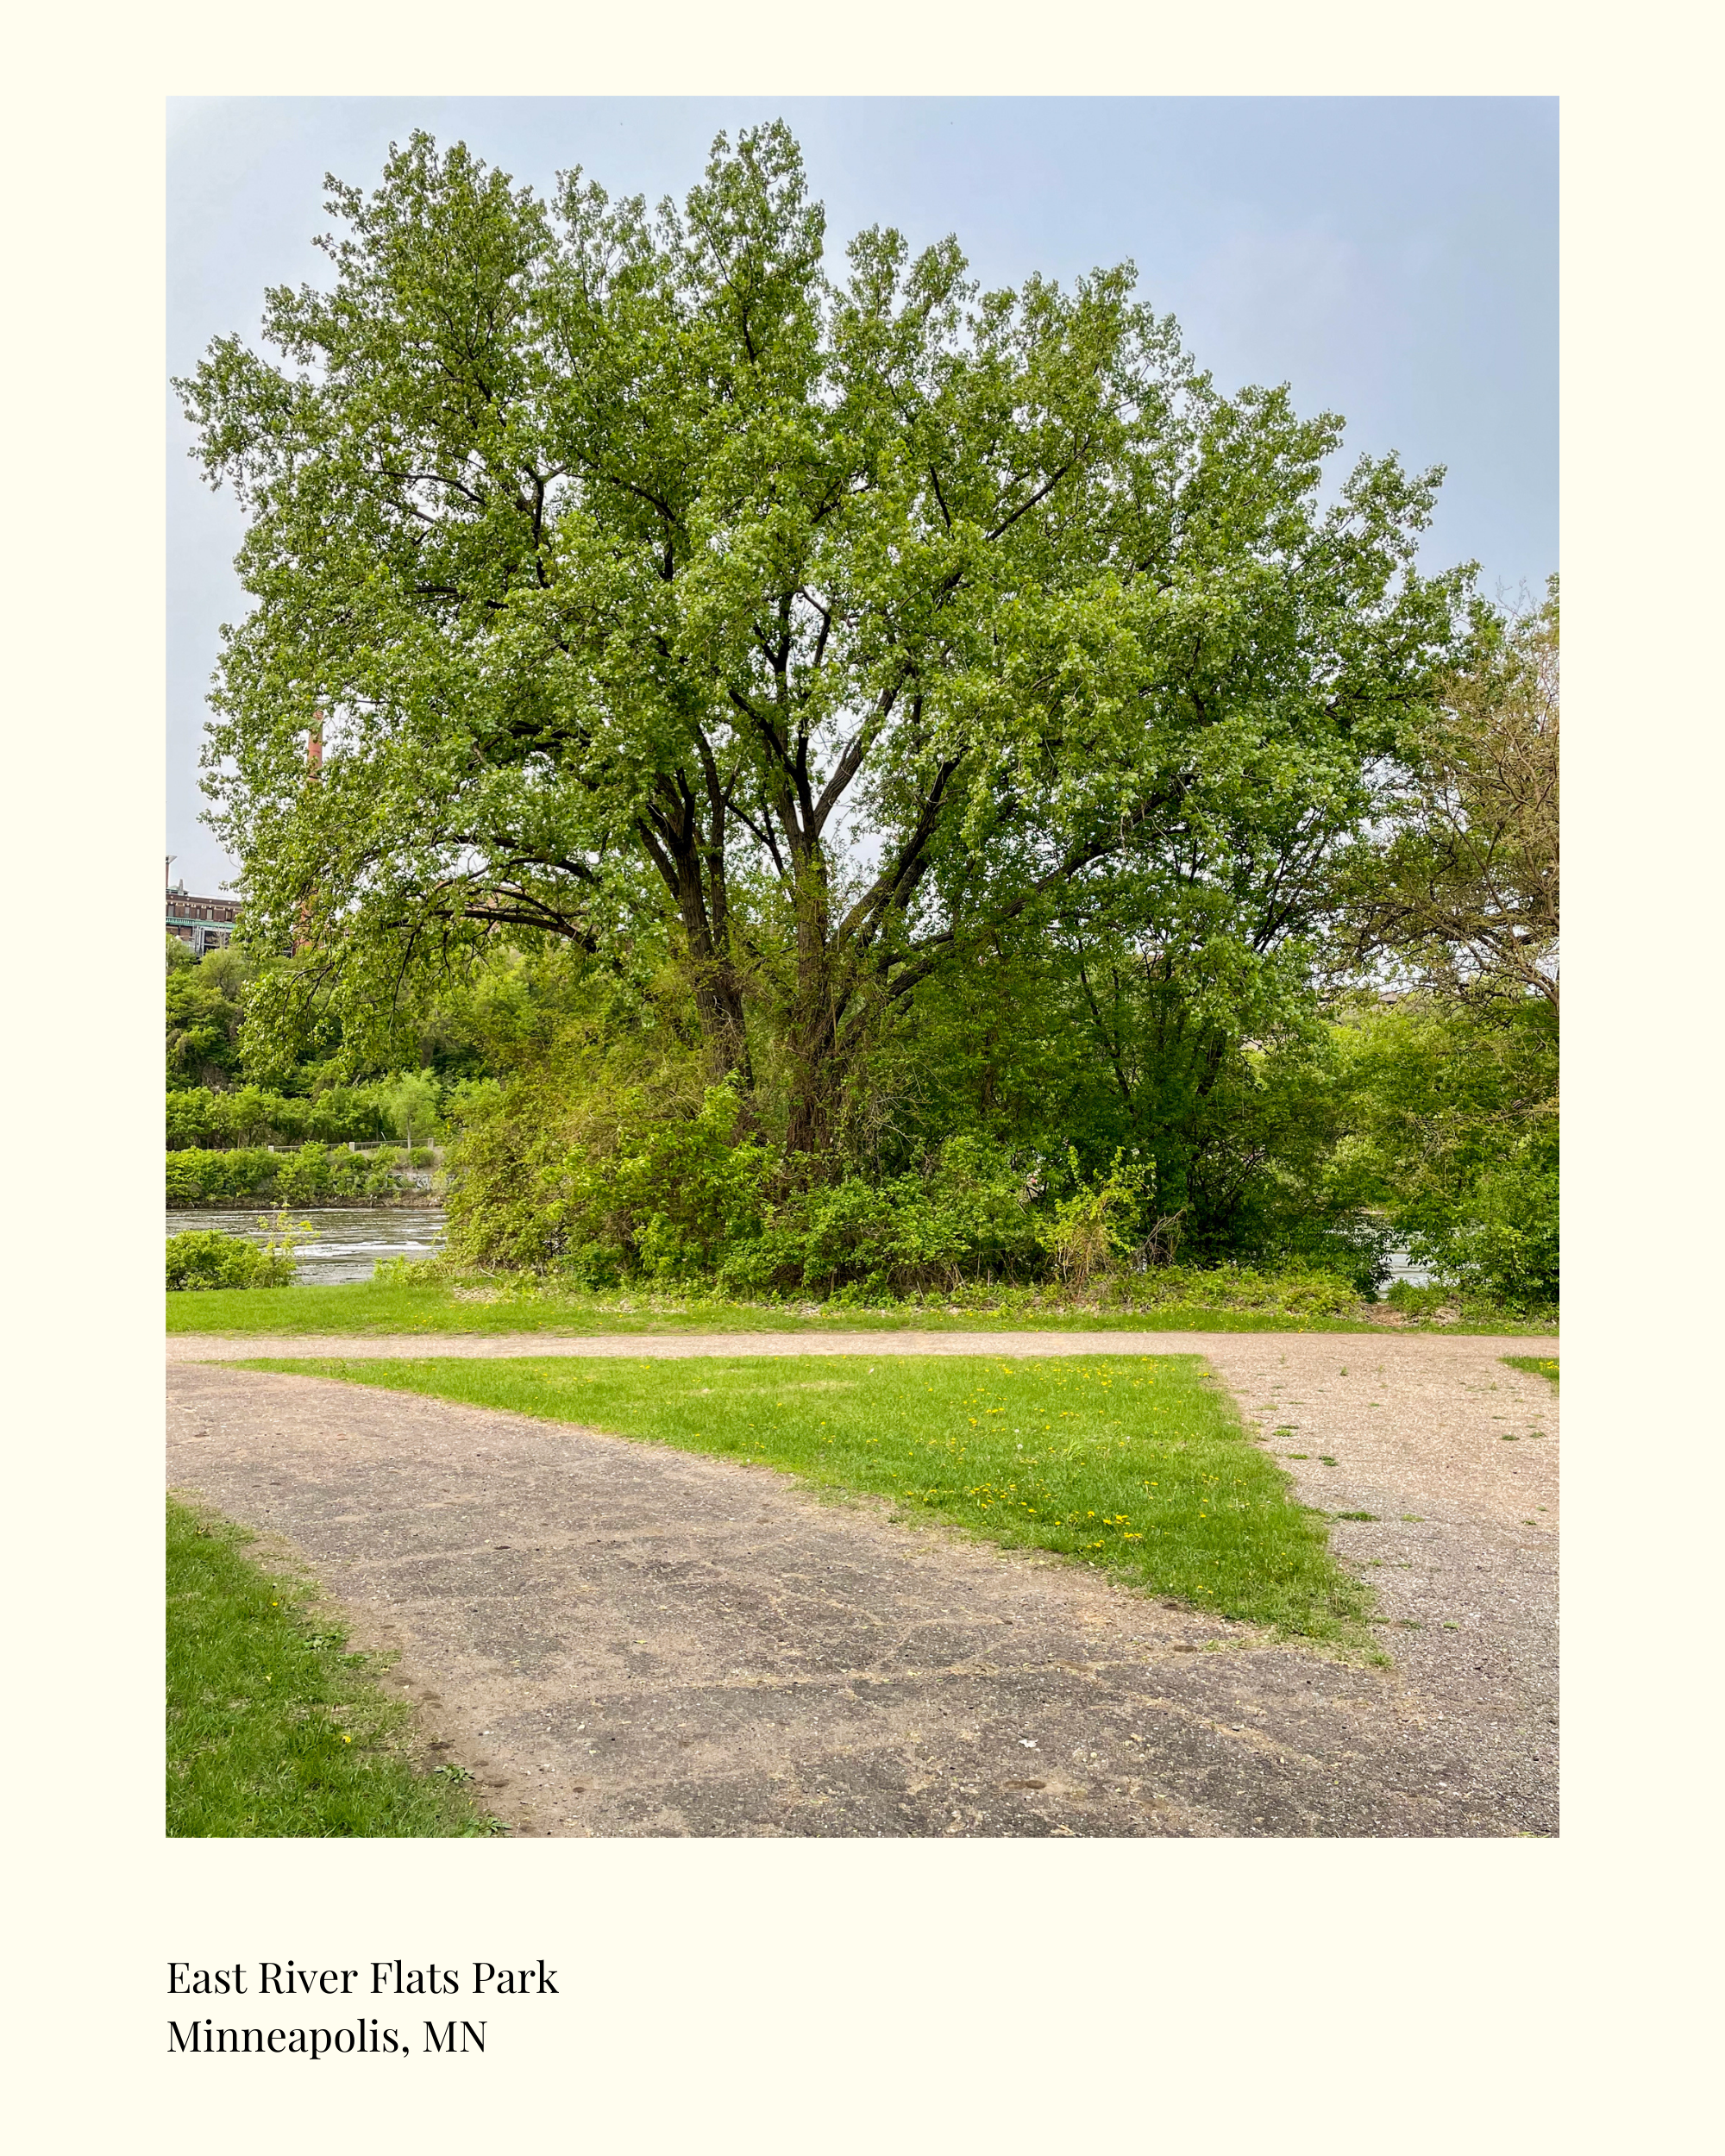 5/23: Walking to the Site of the Oldest Tree in Minneapolis